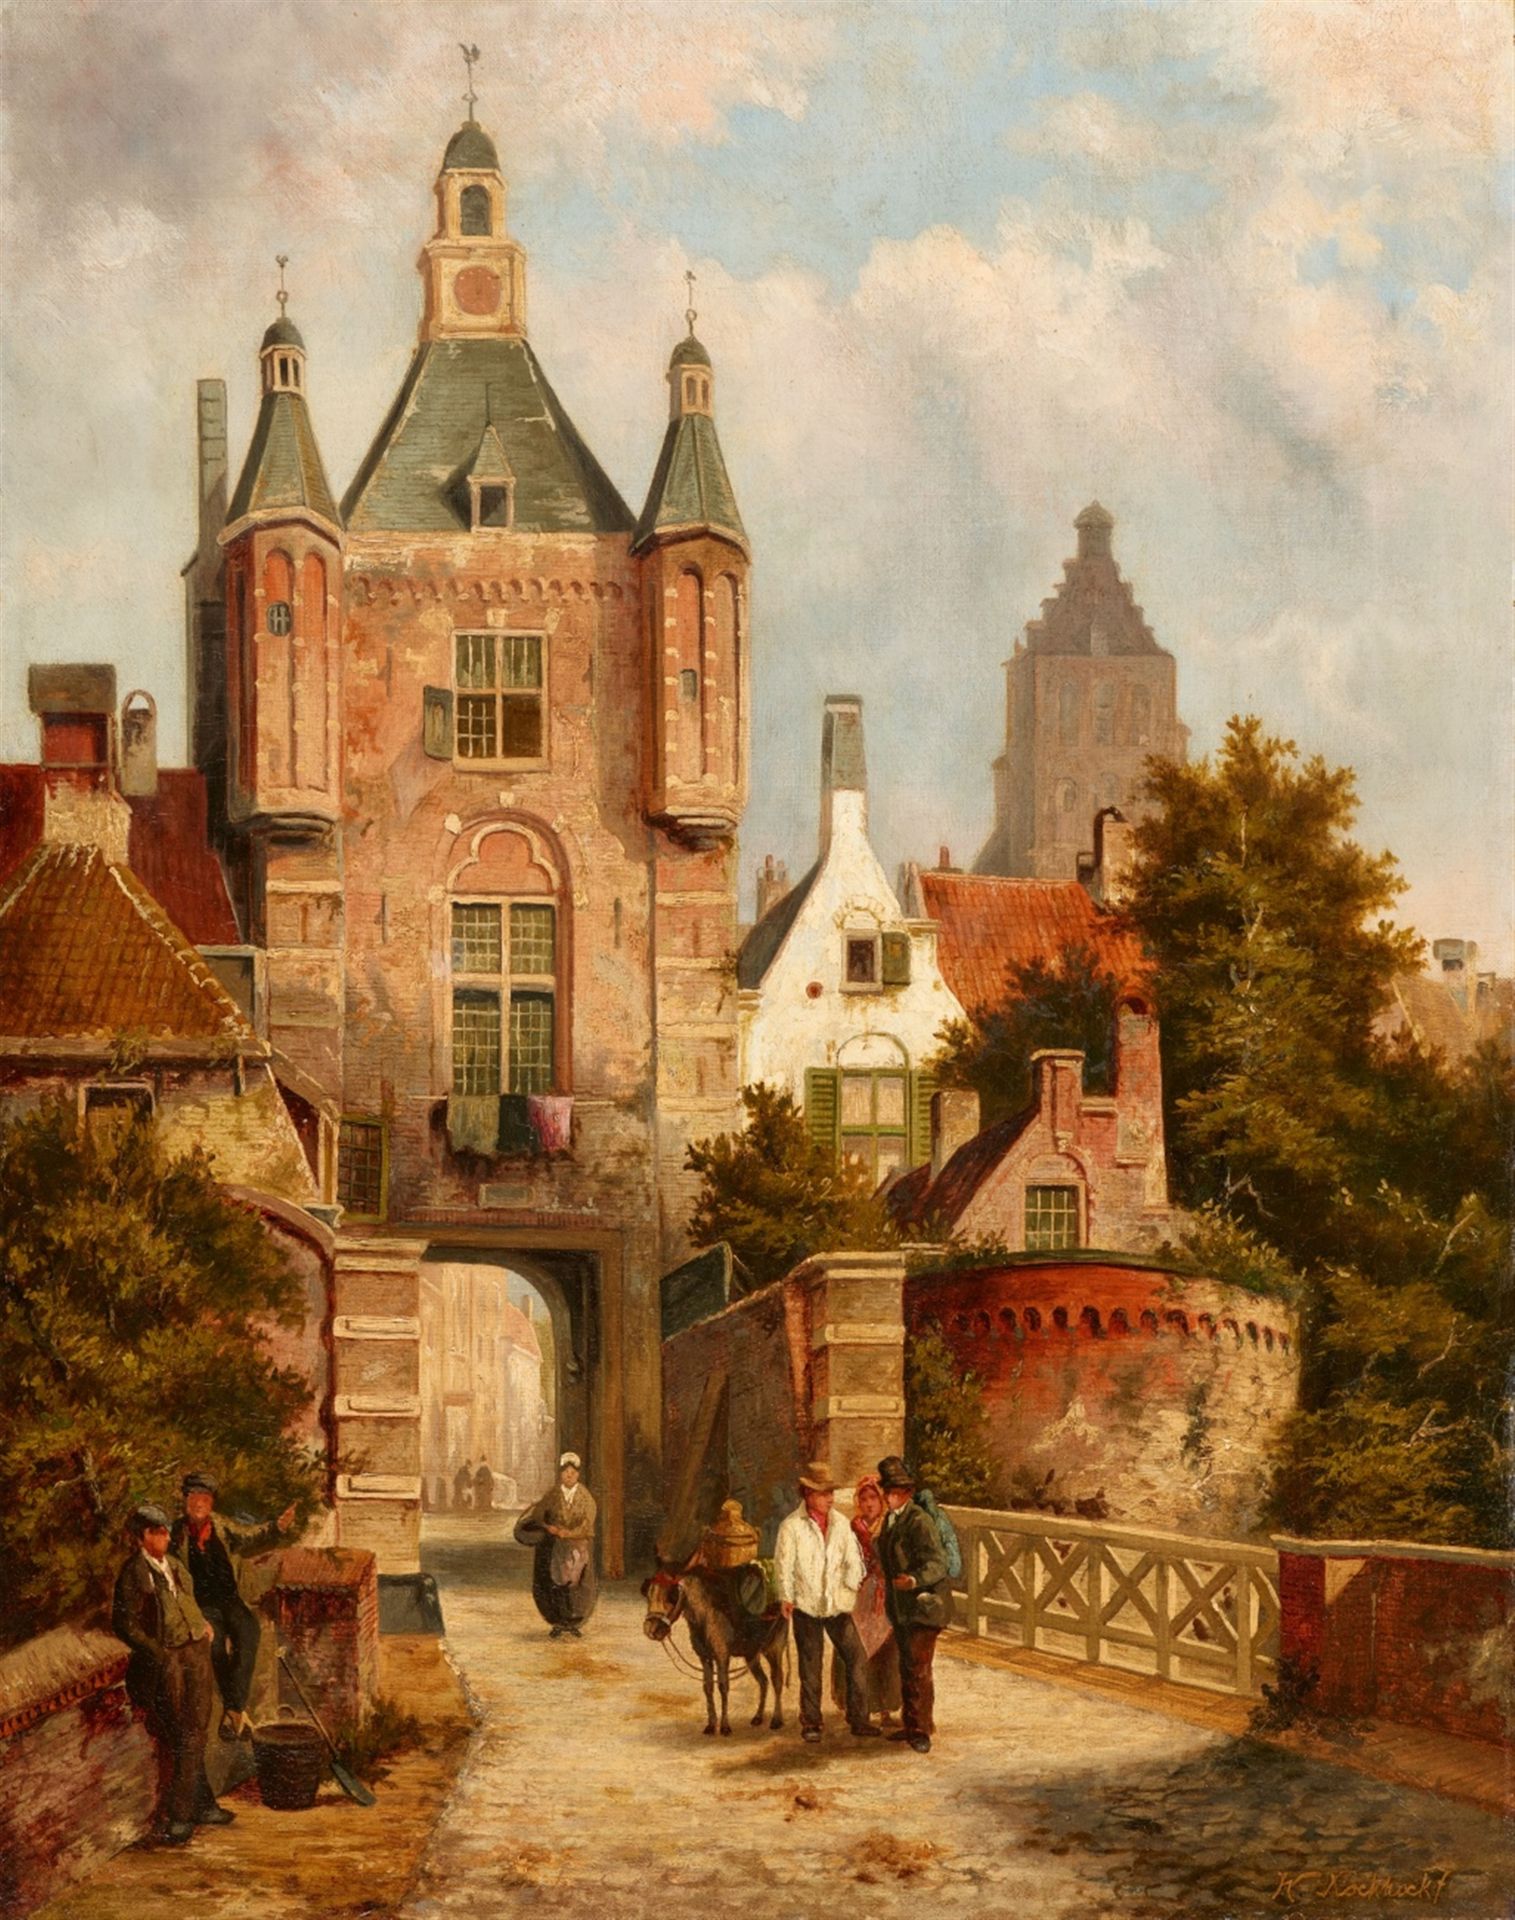 Willem KoekkoekView of a Dutch Town with a Bridge and Tower